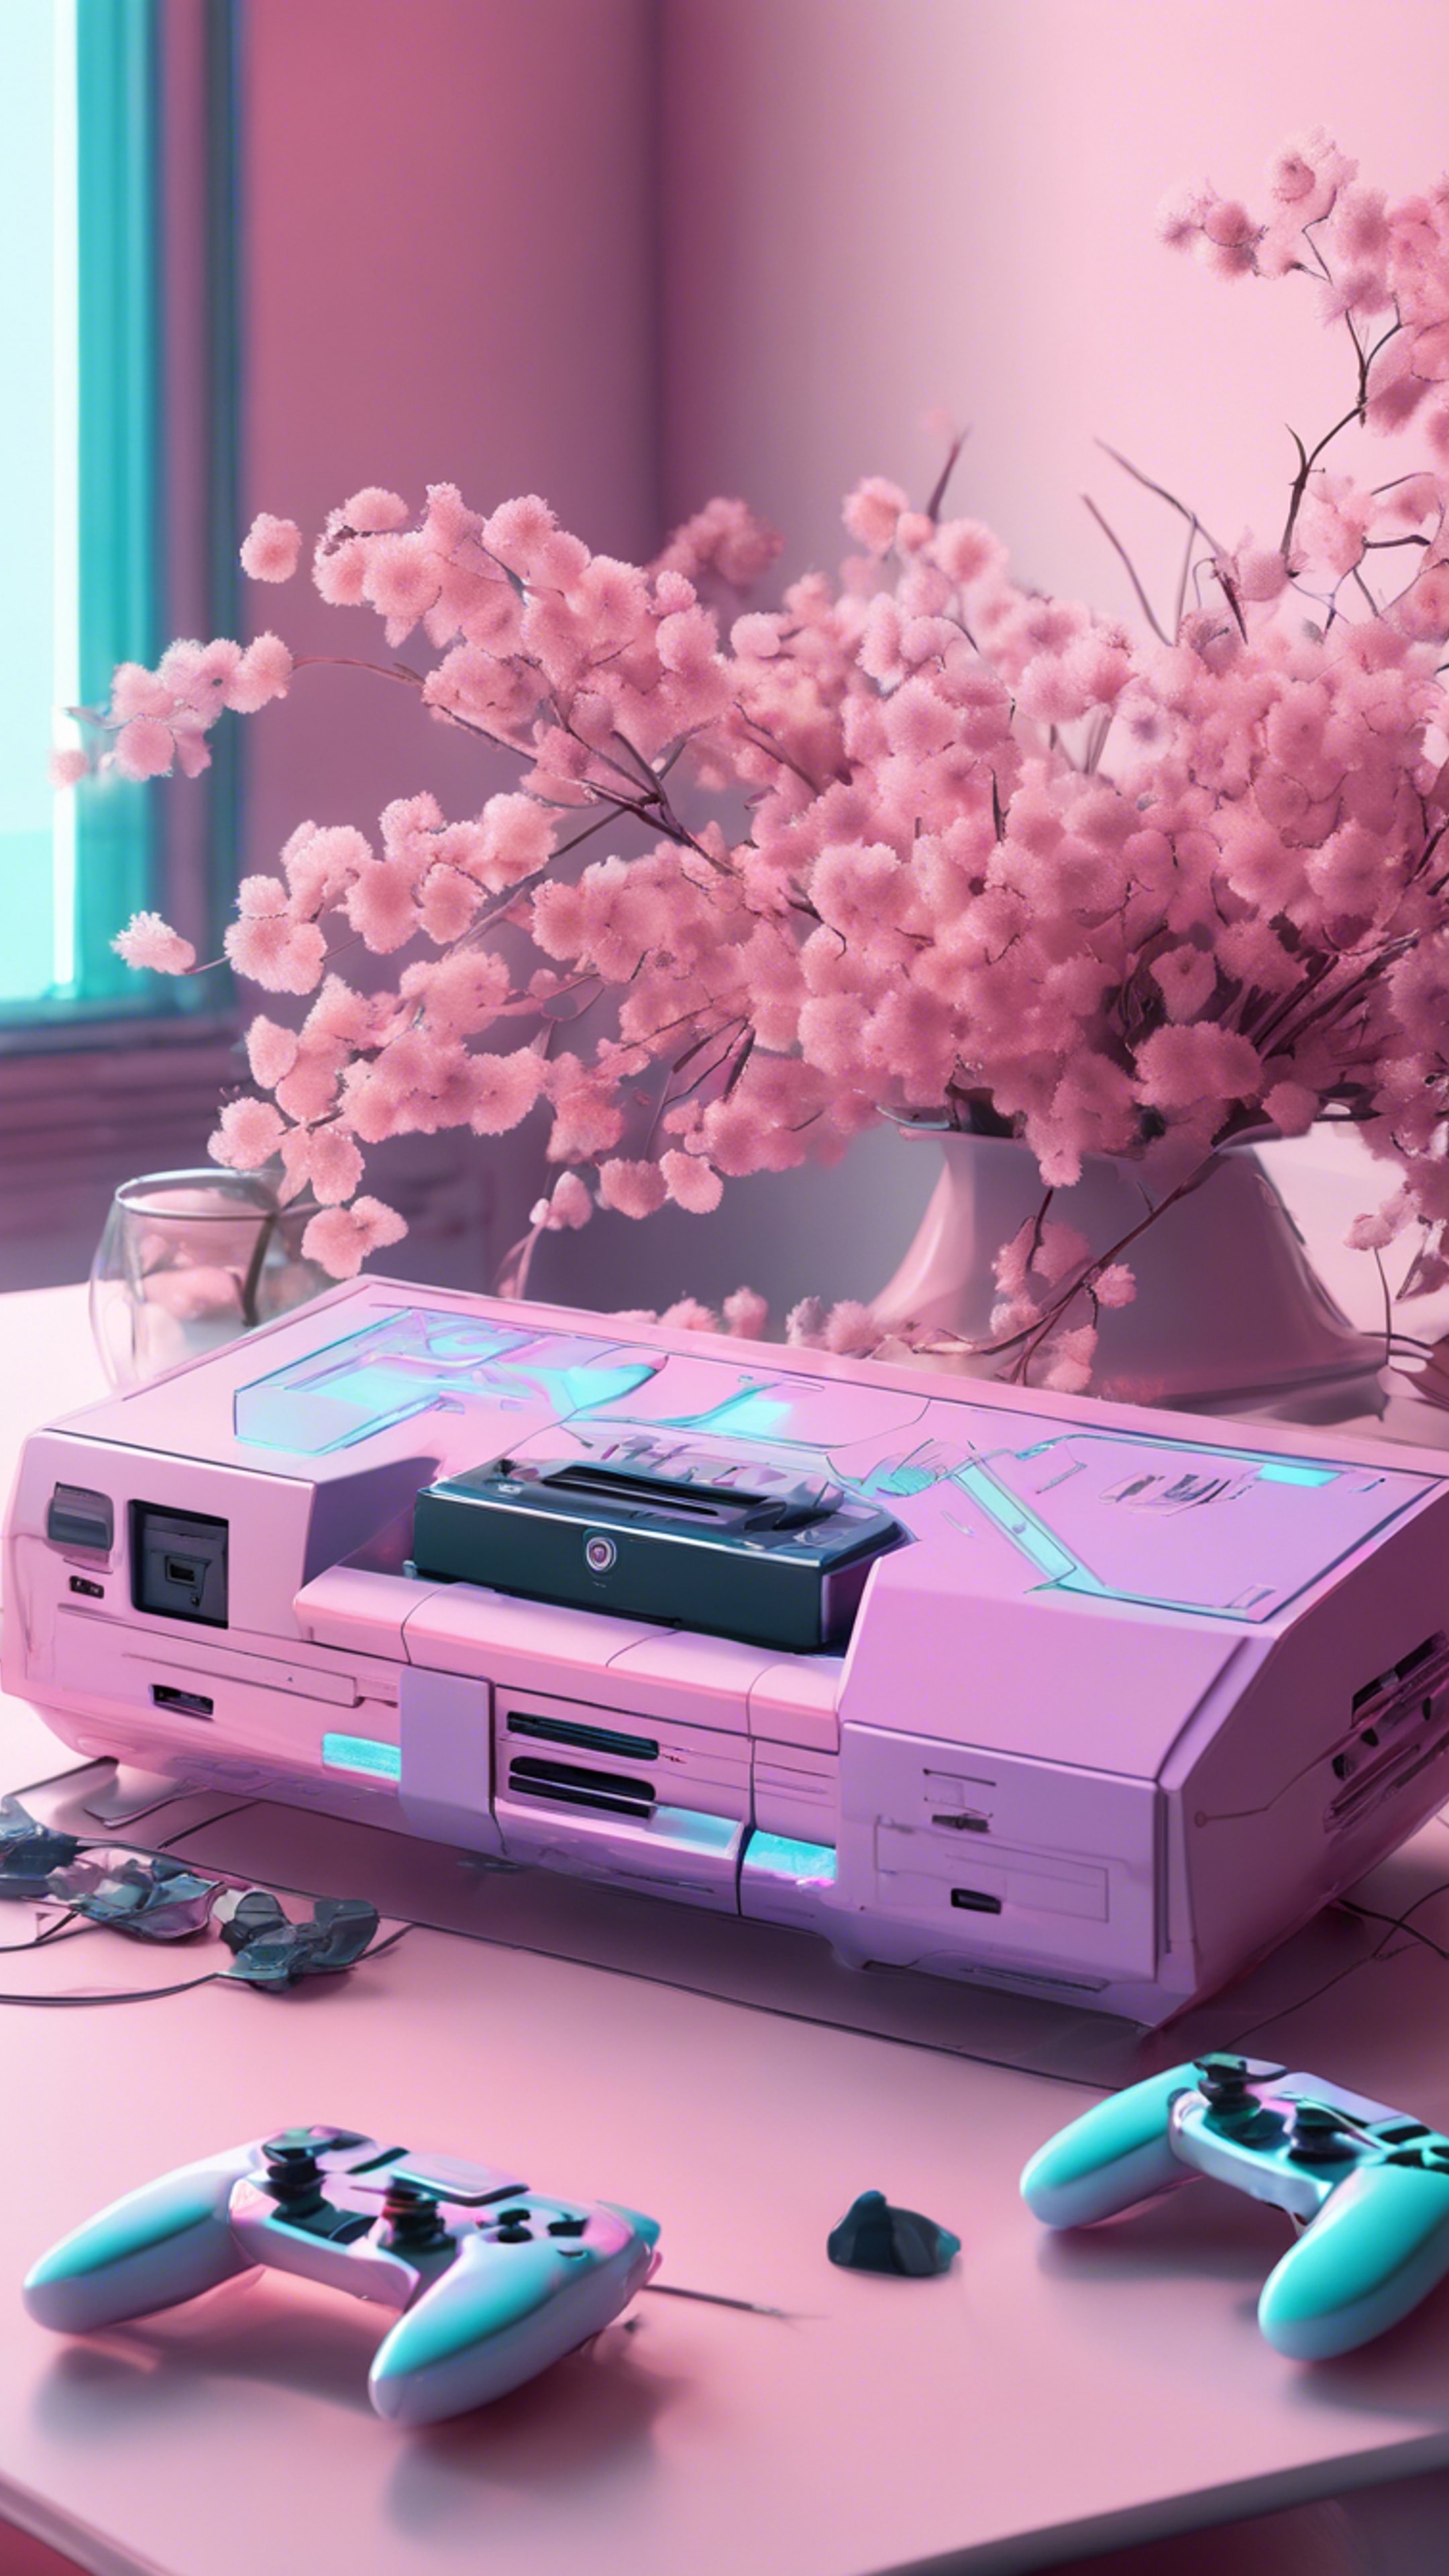 A pastel colored gaming console on a white table next to soft colored flowers in a daylight room. Tapéta[43bf14bcce304acdbb24]